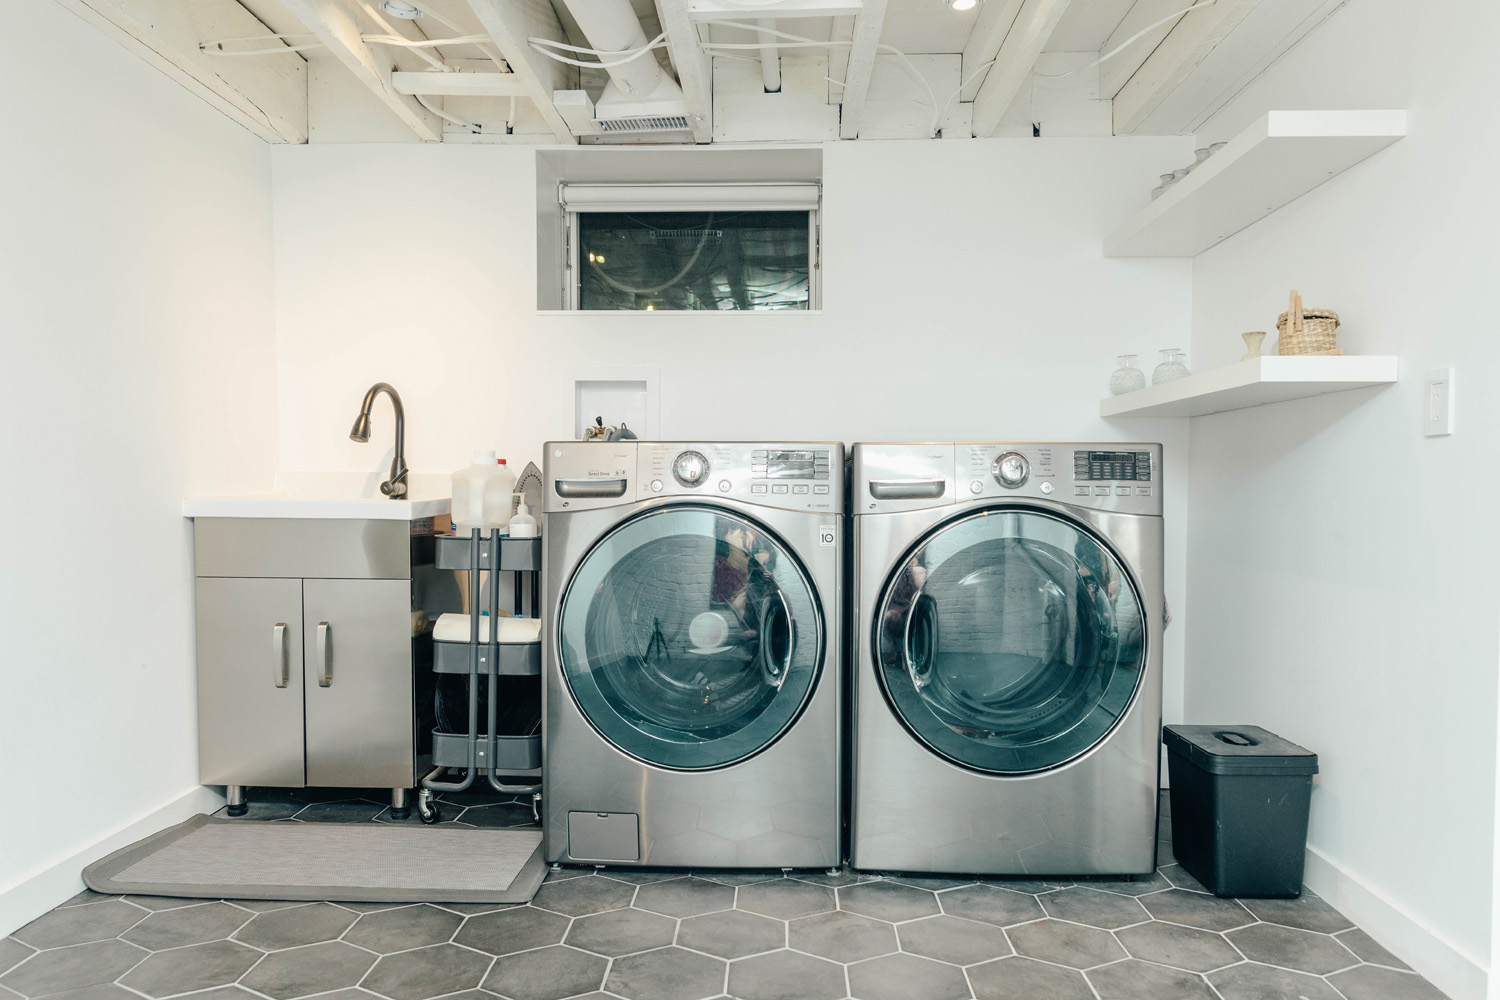 Steel washer-dryer combo in the laundry room